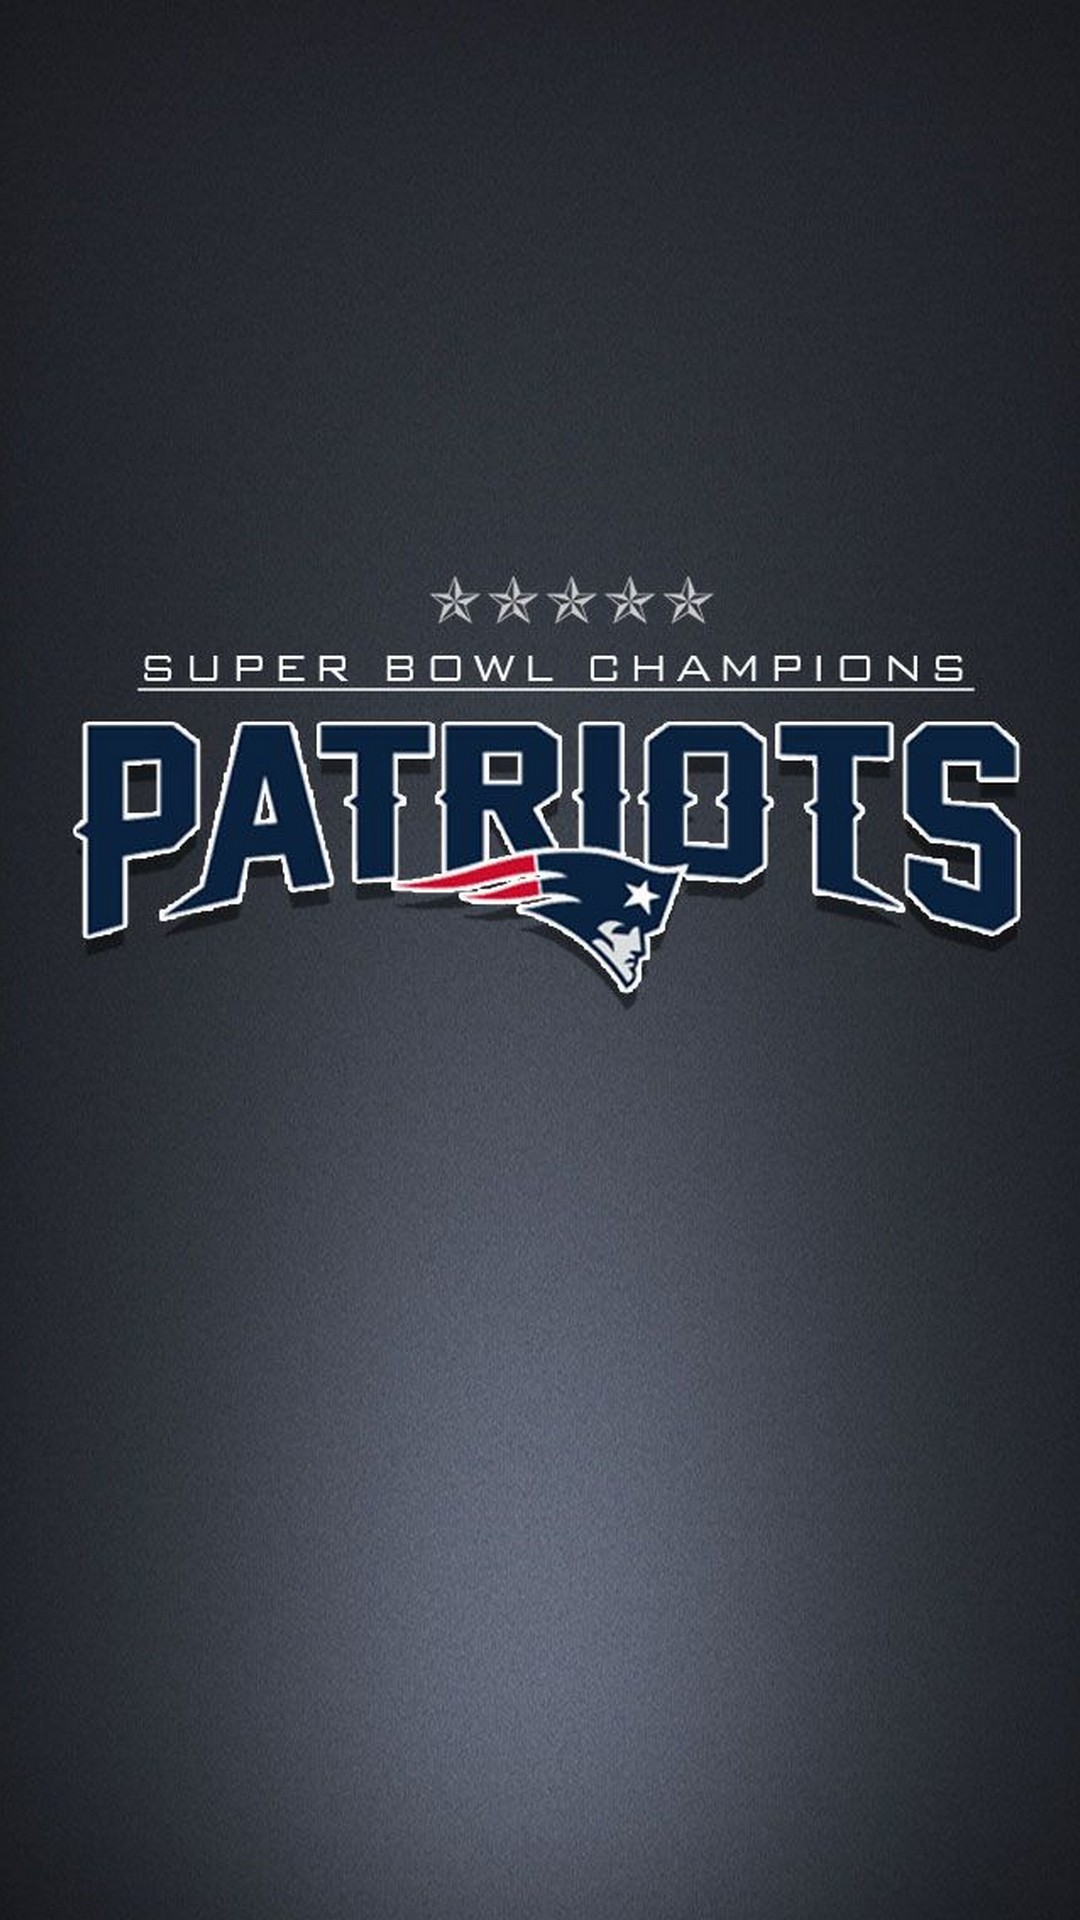 New England Patriots iPhone Home Screen Wallpaper with high-resolution 1080x1920 pixel. Download and set as wallpaper for Apple iPhone X, XS Max, XR, 8, 7, 6, SE, iPad, Android